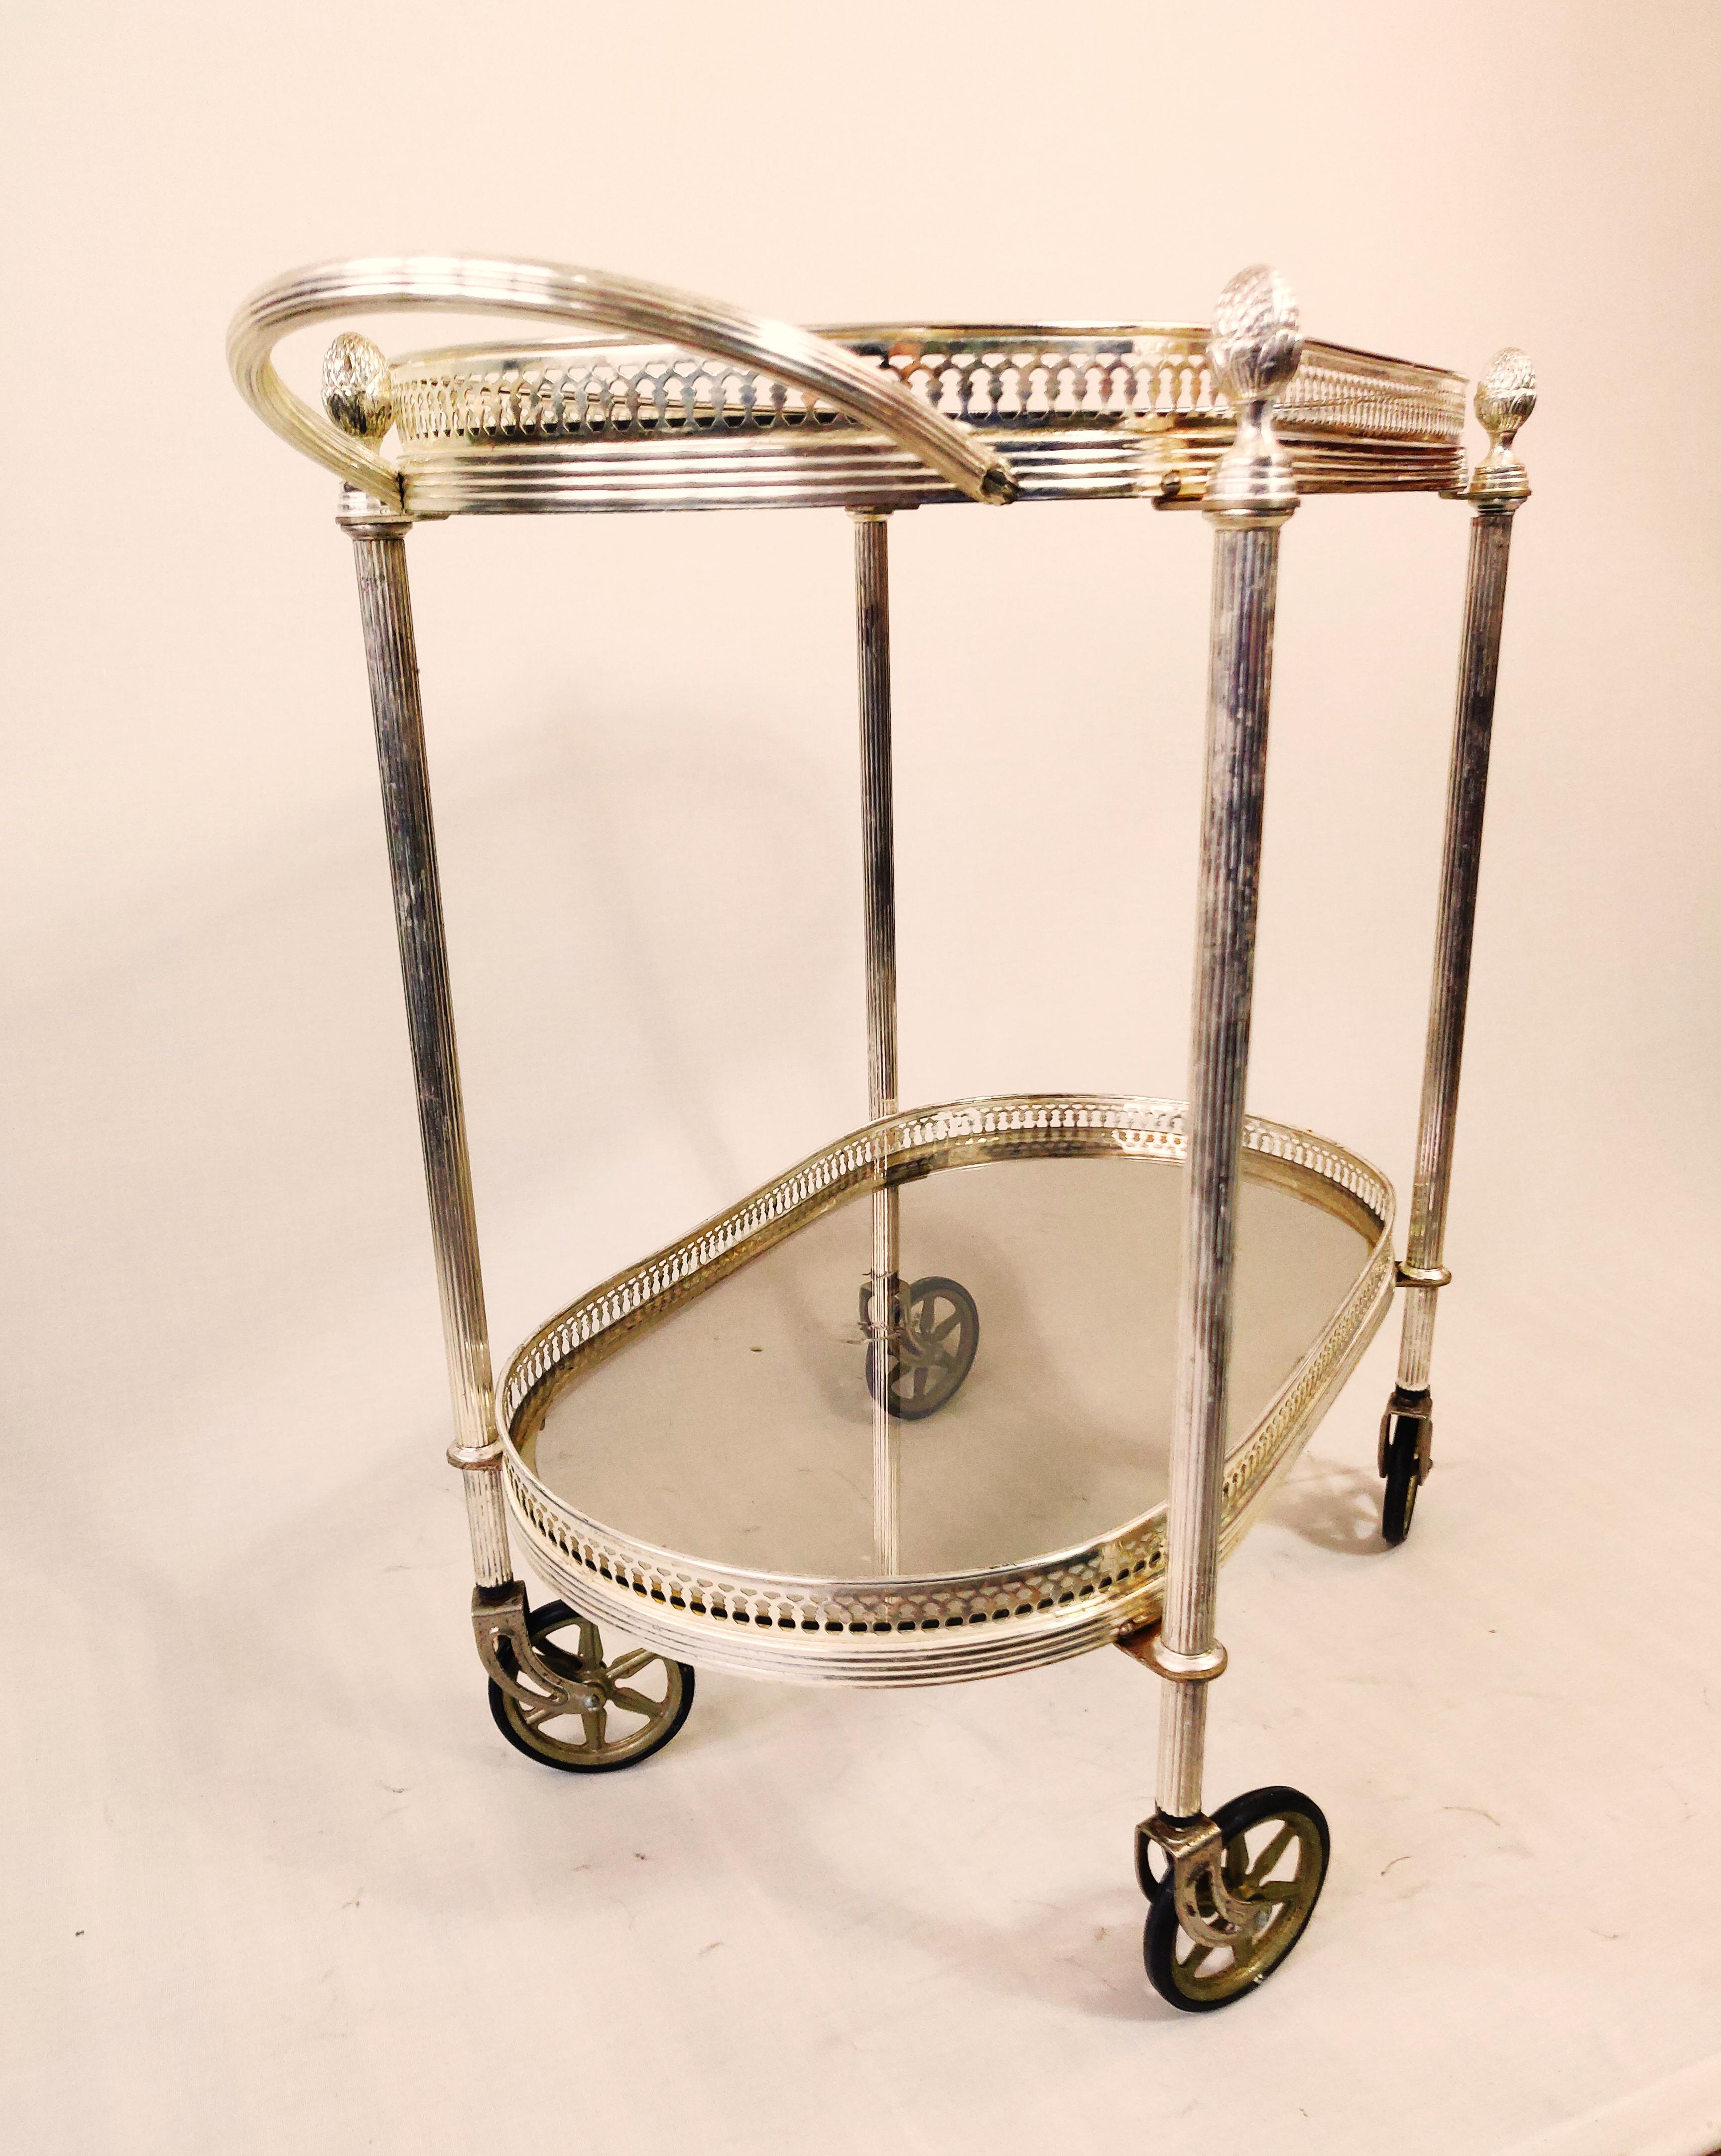 Silvered neoclassical bar cart in style of Maison Jansen,
 Very attractive Maison Jansen style silvered bronze 2 tier bar cart. Finely cast galleries give this piece a neoclassical flair. All original wheels which run smoothly.
It features two oval